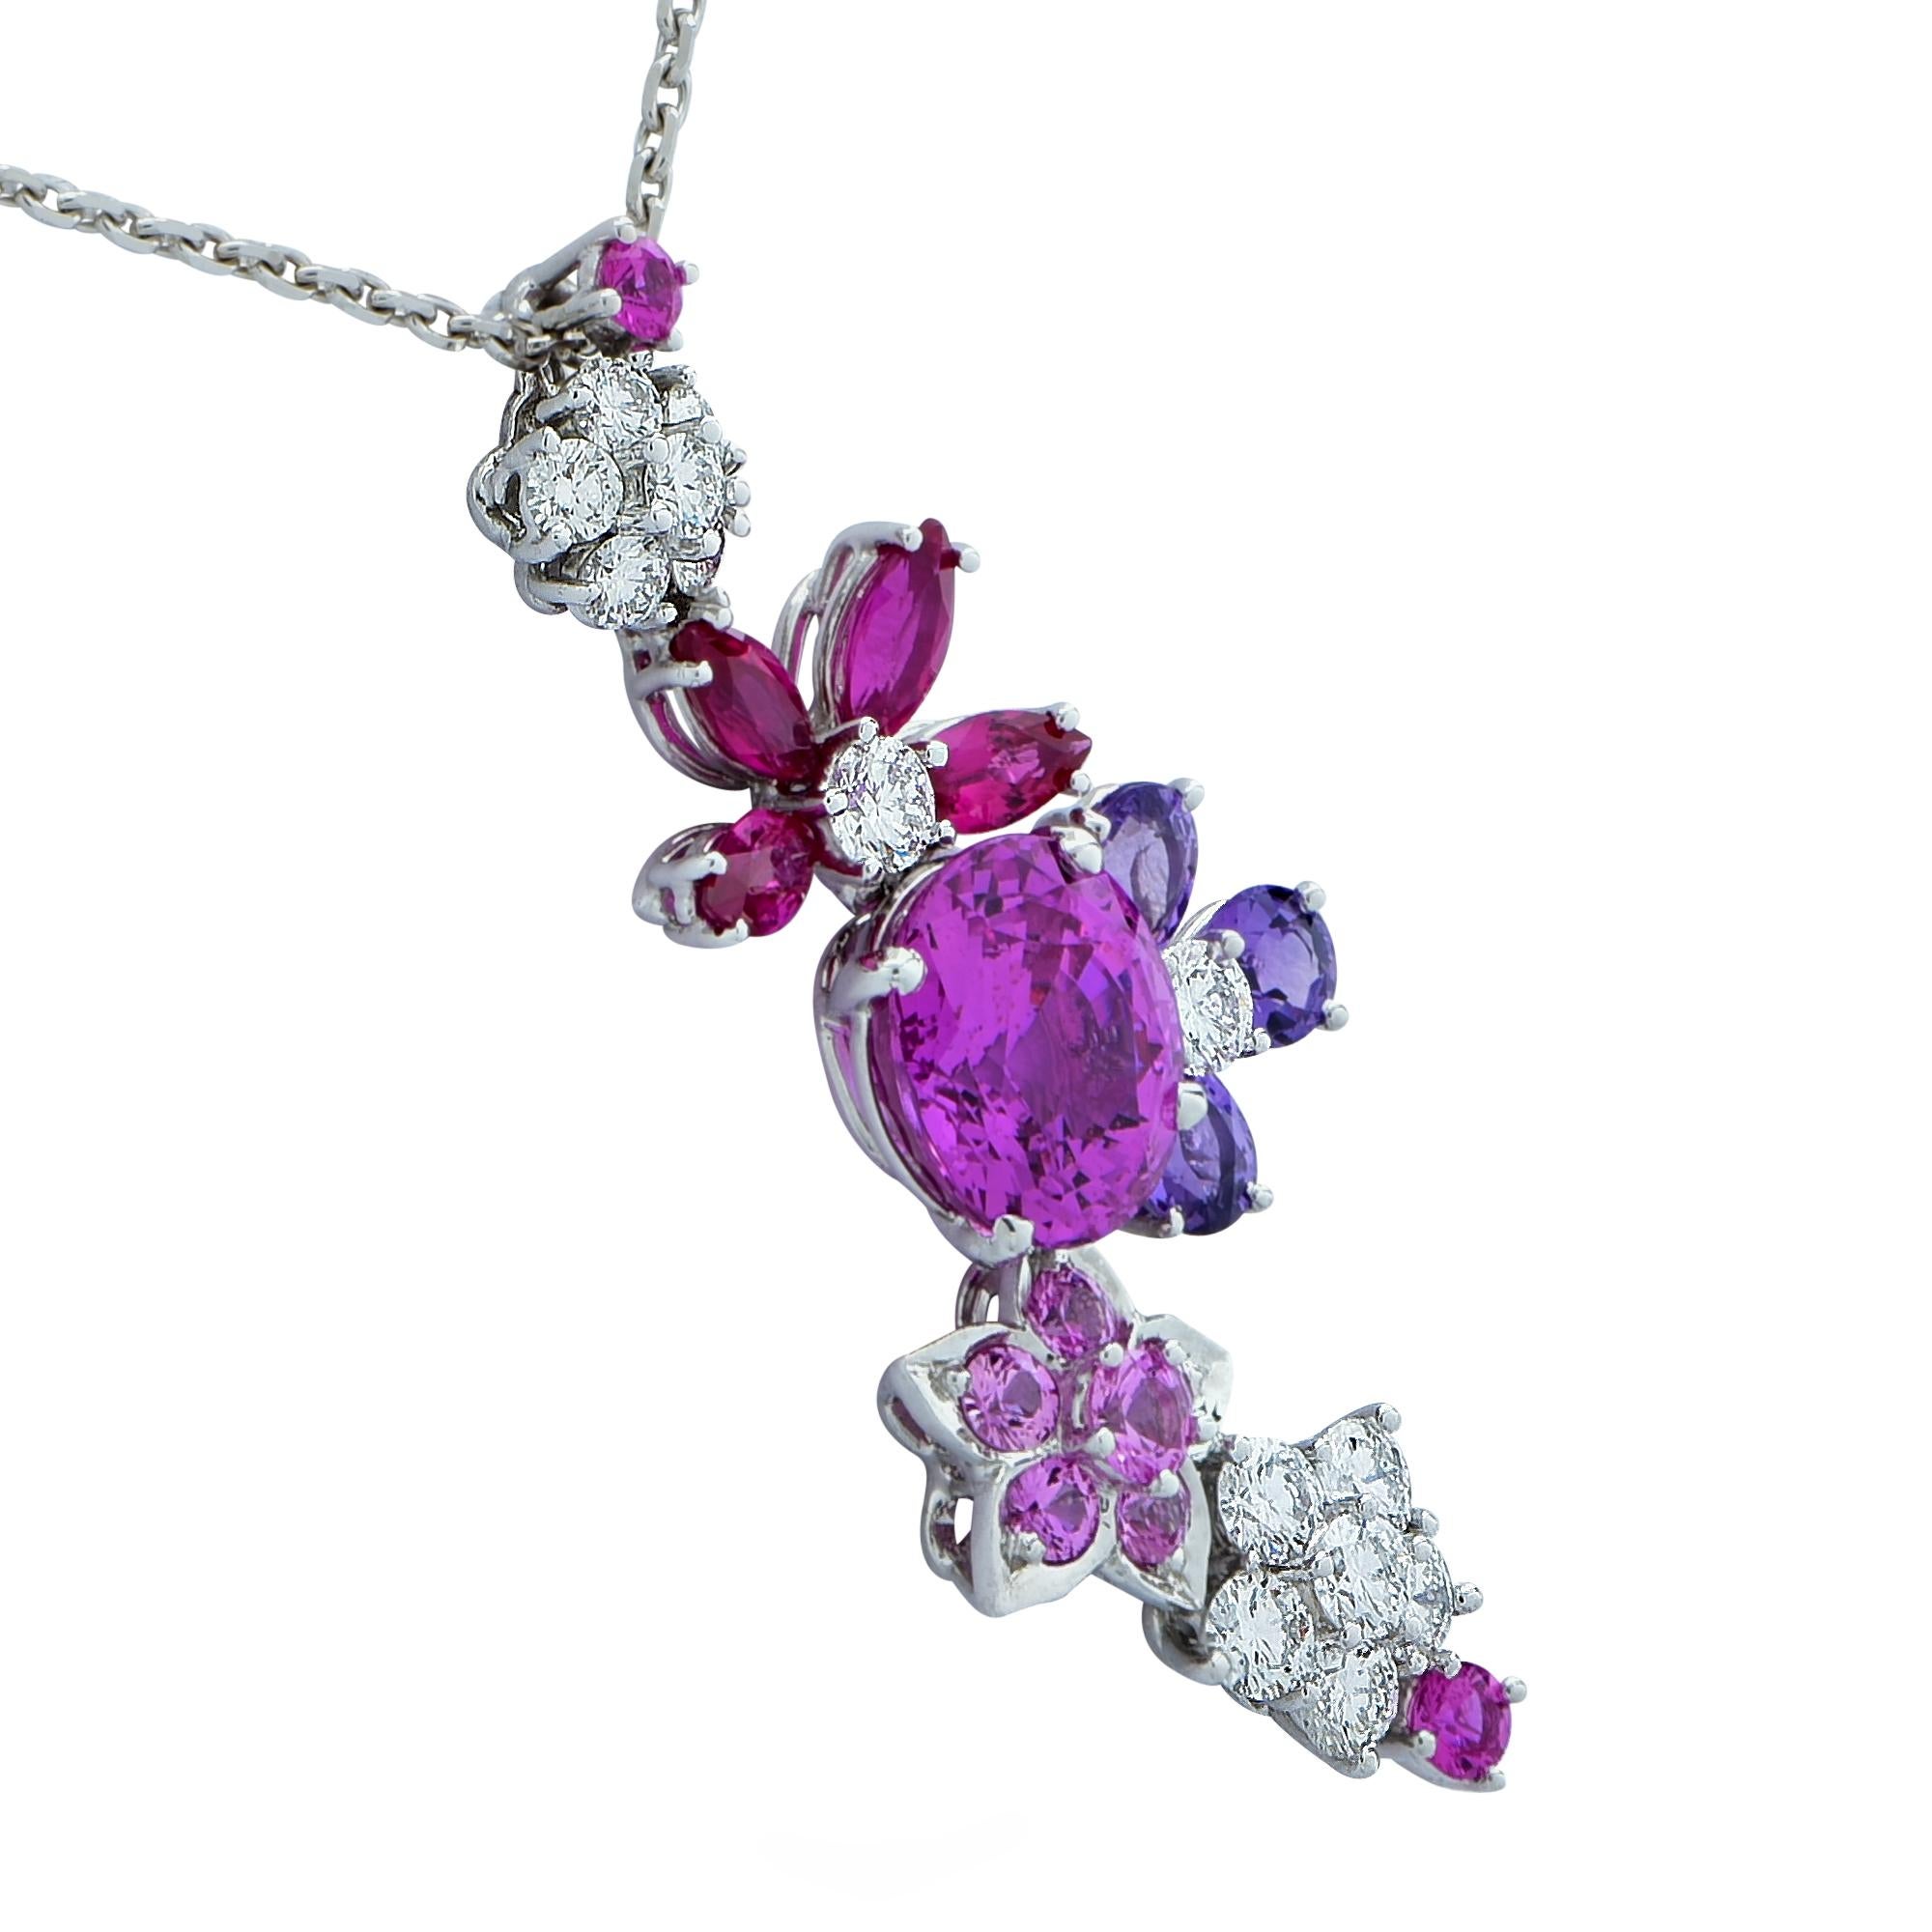 From the House of Van Cleef & Arpels, this exquisite Folie des Pres High Jewelry Collection White Gold, Diamond and Sapphire necklace, finely handmade in 18 Karat White Gold, showcases an oval AGL certified no heat pink sapphire accented by diamonds